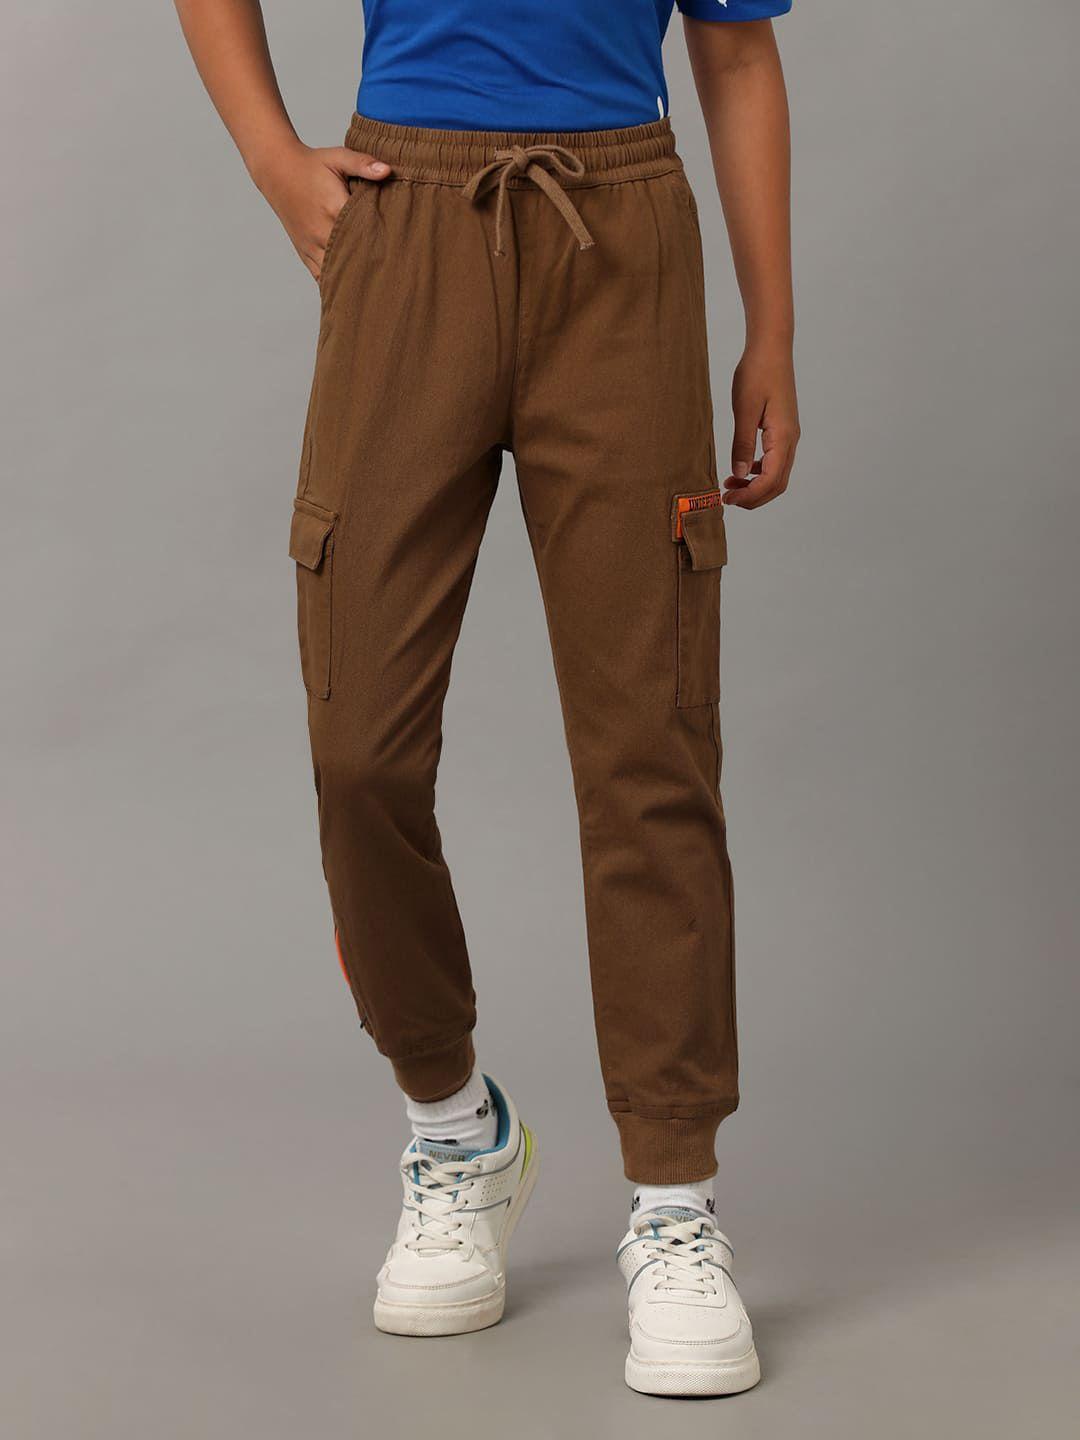 under-fourteen-only-boys-mid-rise-loose-fit-cargo-trouser